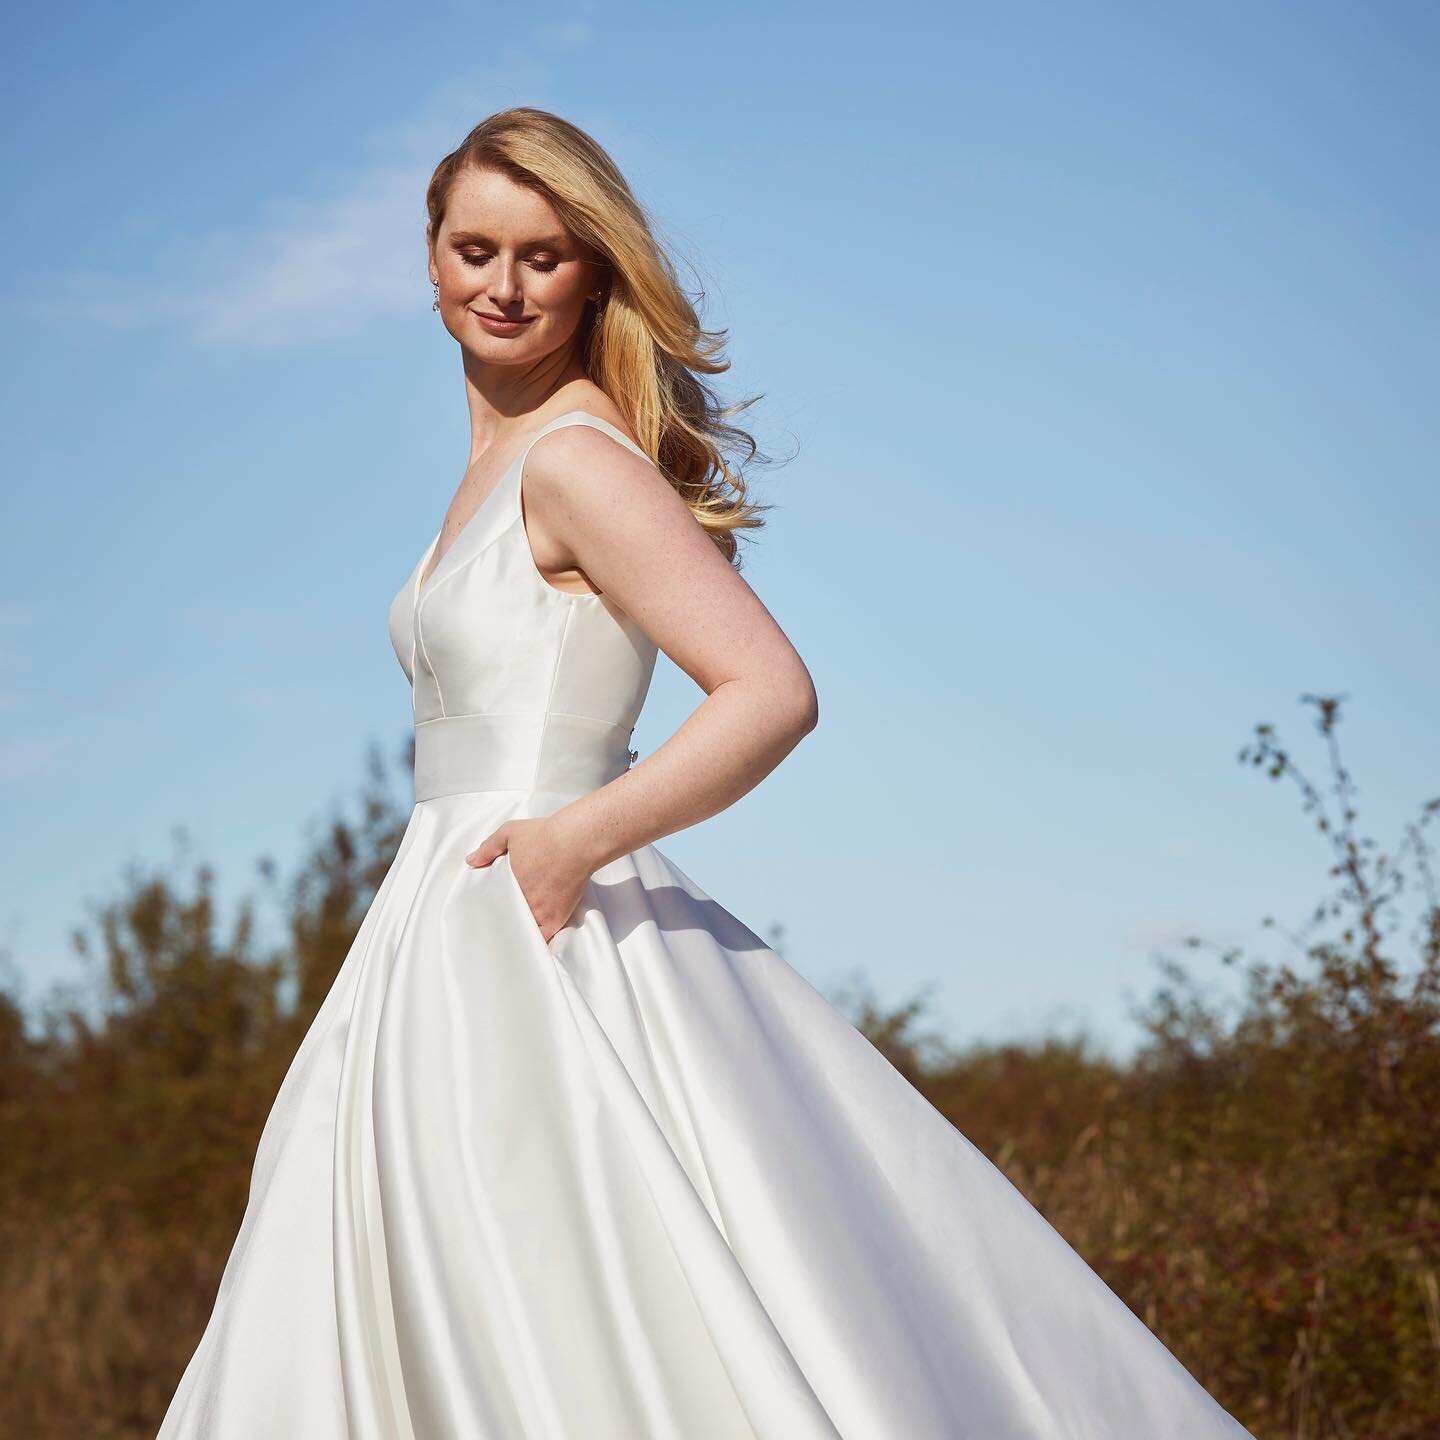 We love a pocket! 🙌🏻 

Our Timeless Bridal dresses by @tiffanysbridaldresses give the best modern take on a classic bride 😍 

We have this dress and so many others for you to try, so get your appointments booked in girls! 

#bridetobe #weddingdres